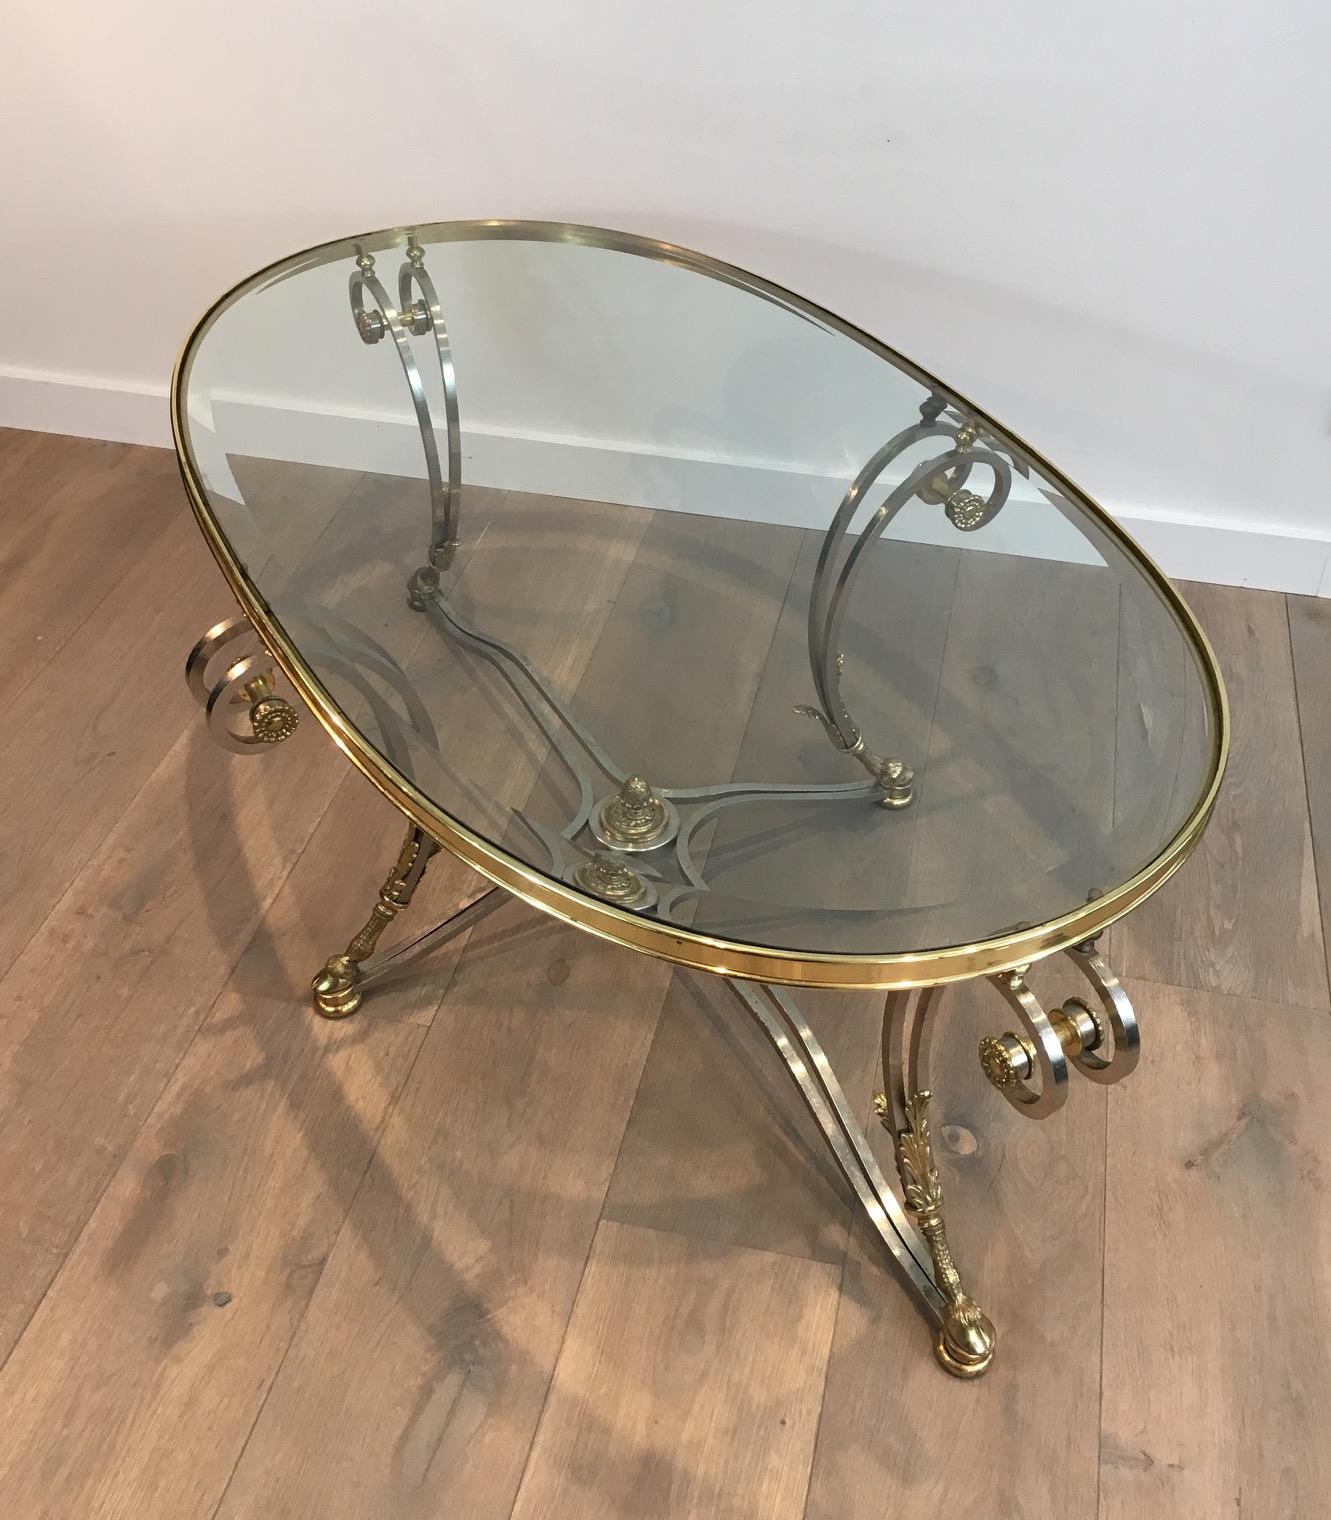 This beautiful neoclassical oval coffee table is made of brushed steel and brass with a nice oval beveled glass top. It has nice ornaments, a very elegant stretcher with a finial on its center and four brass down feet. This is a delicate work in the